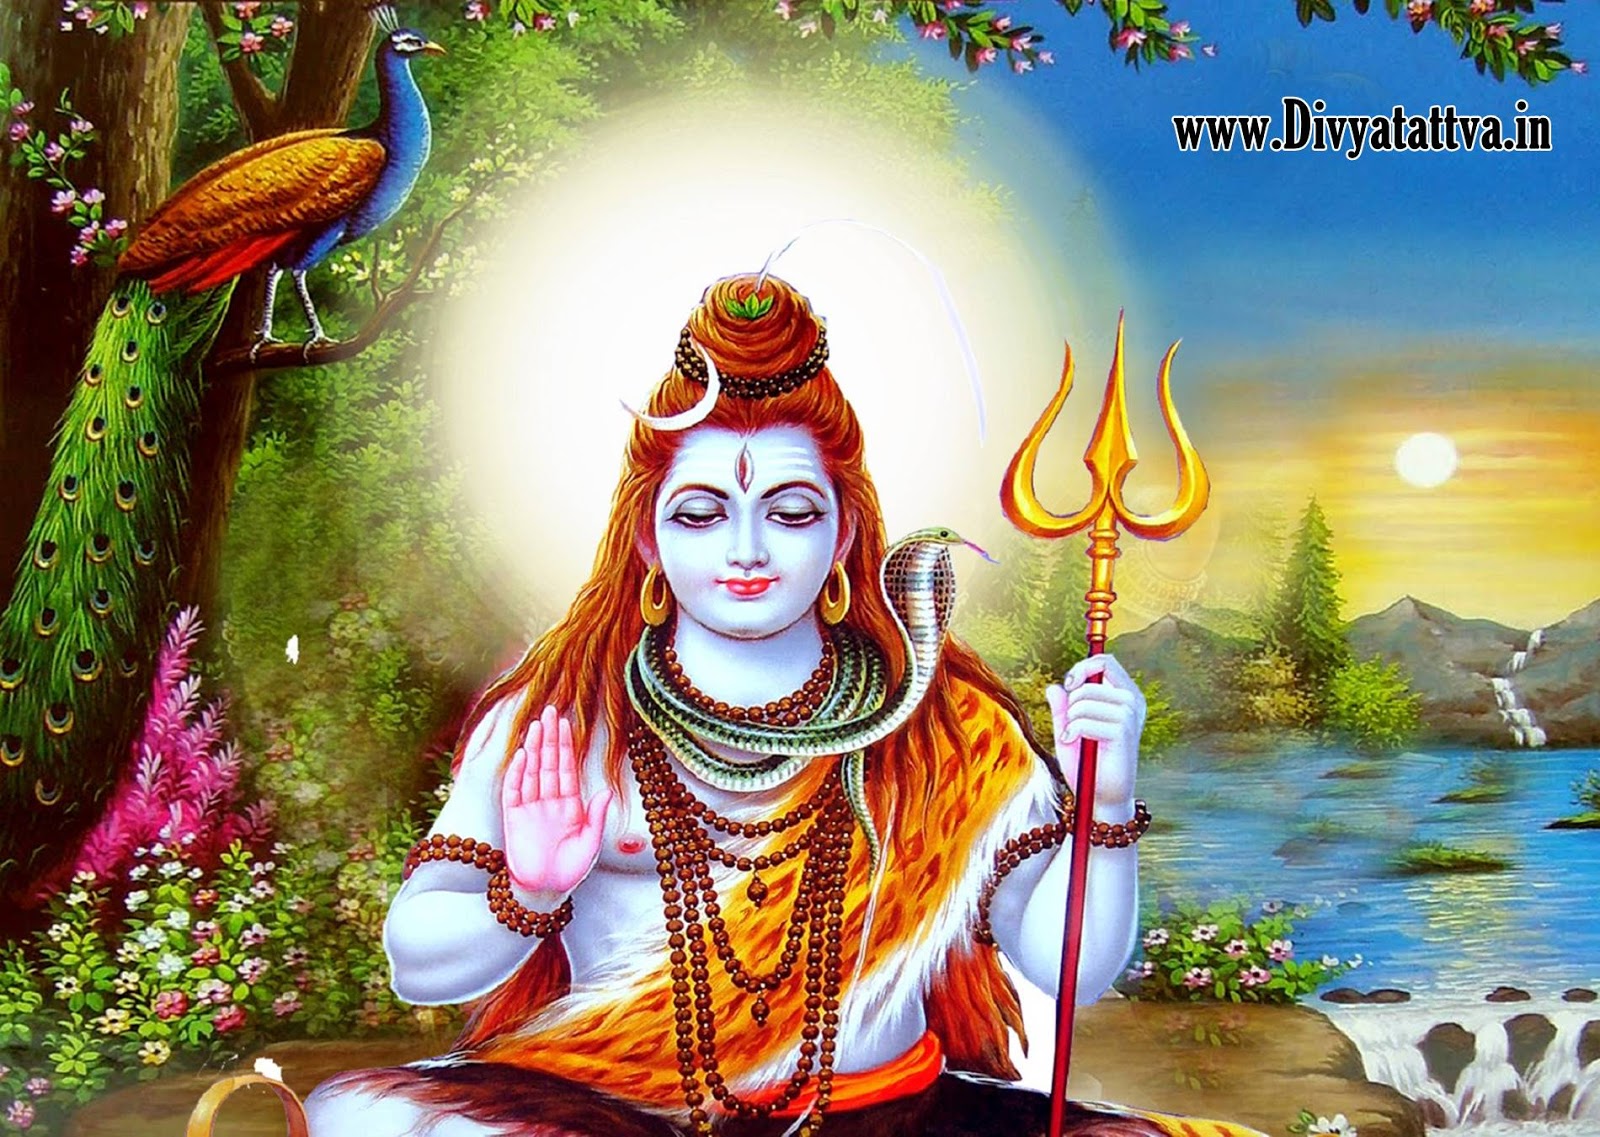 Lord Shiva Parvati Wallpapers Free Download For Mobile Gallerynew